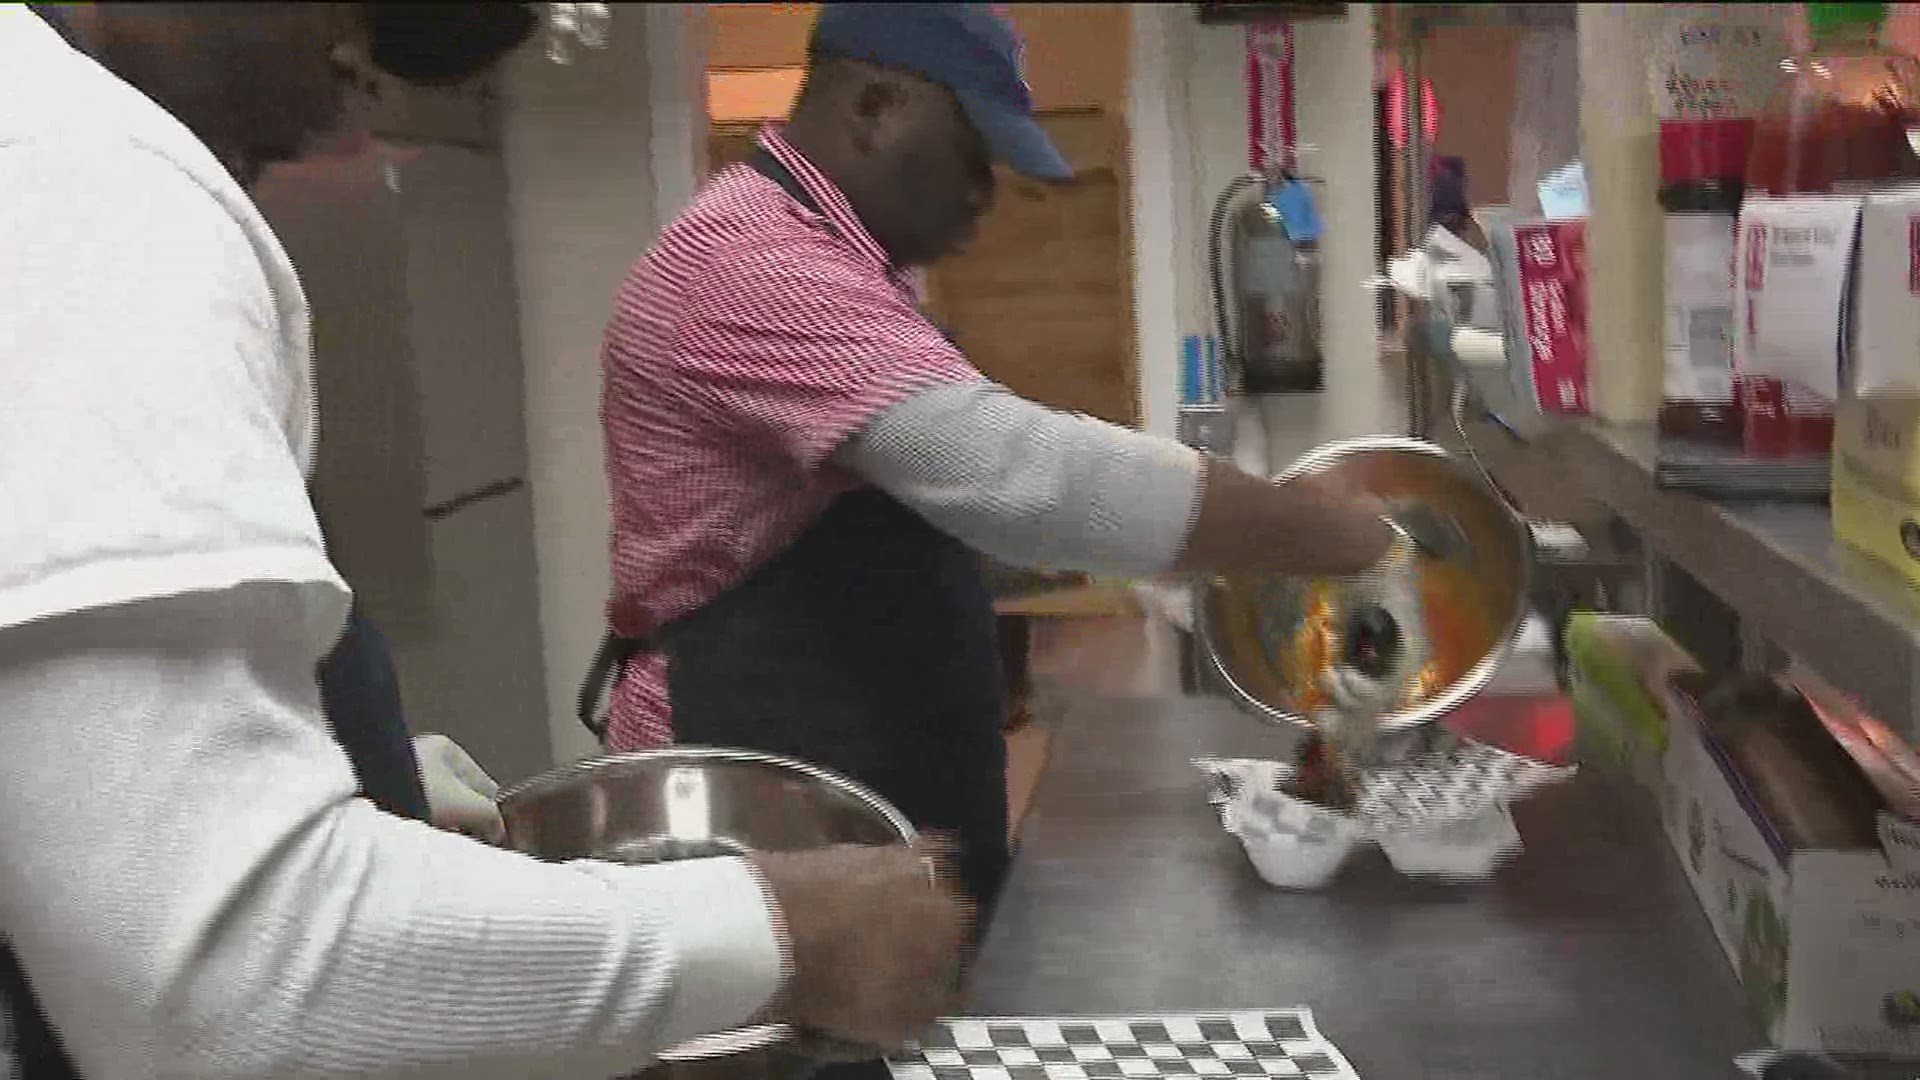 After seven years, a police chief is trading his badge for a chef's hat.